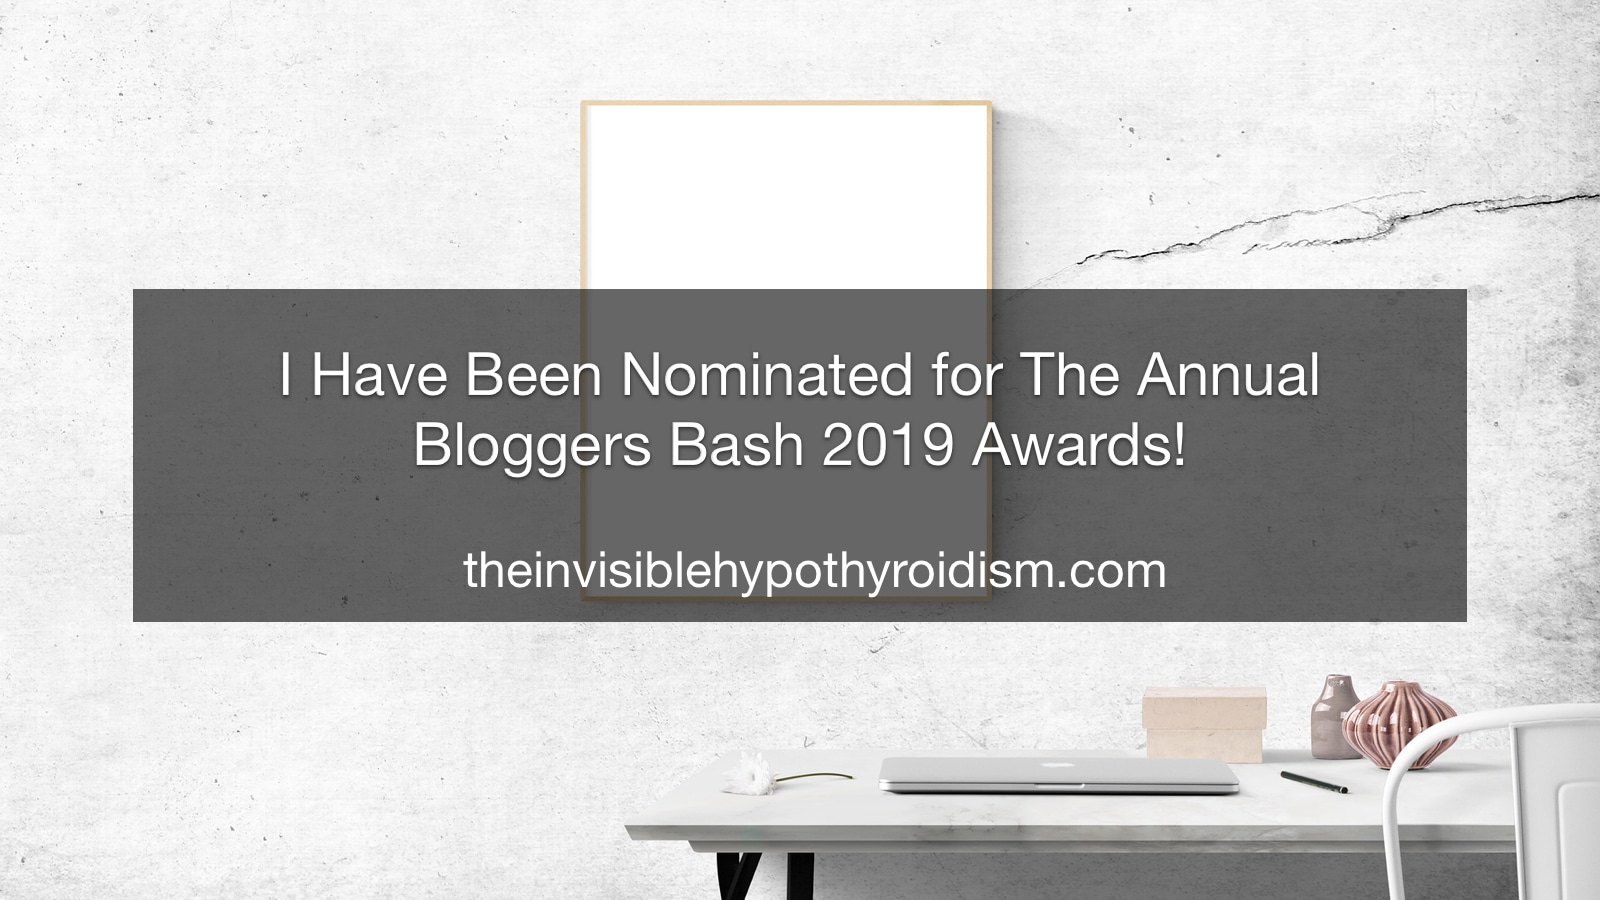 I Have Been Nominated for The Annual Bloggers Bash 2019 Awards!